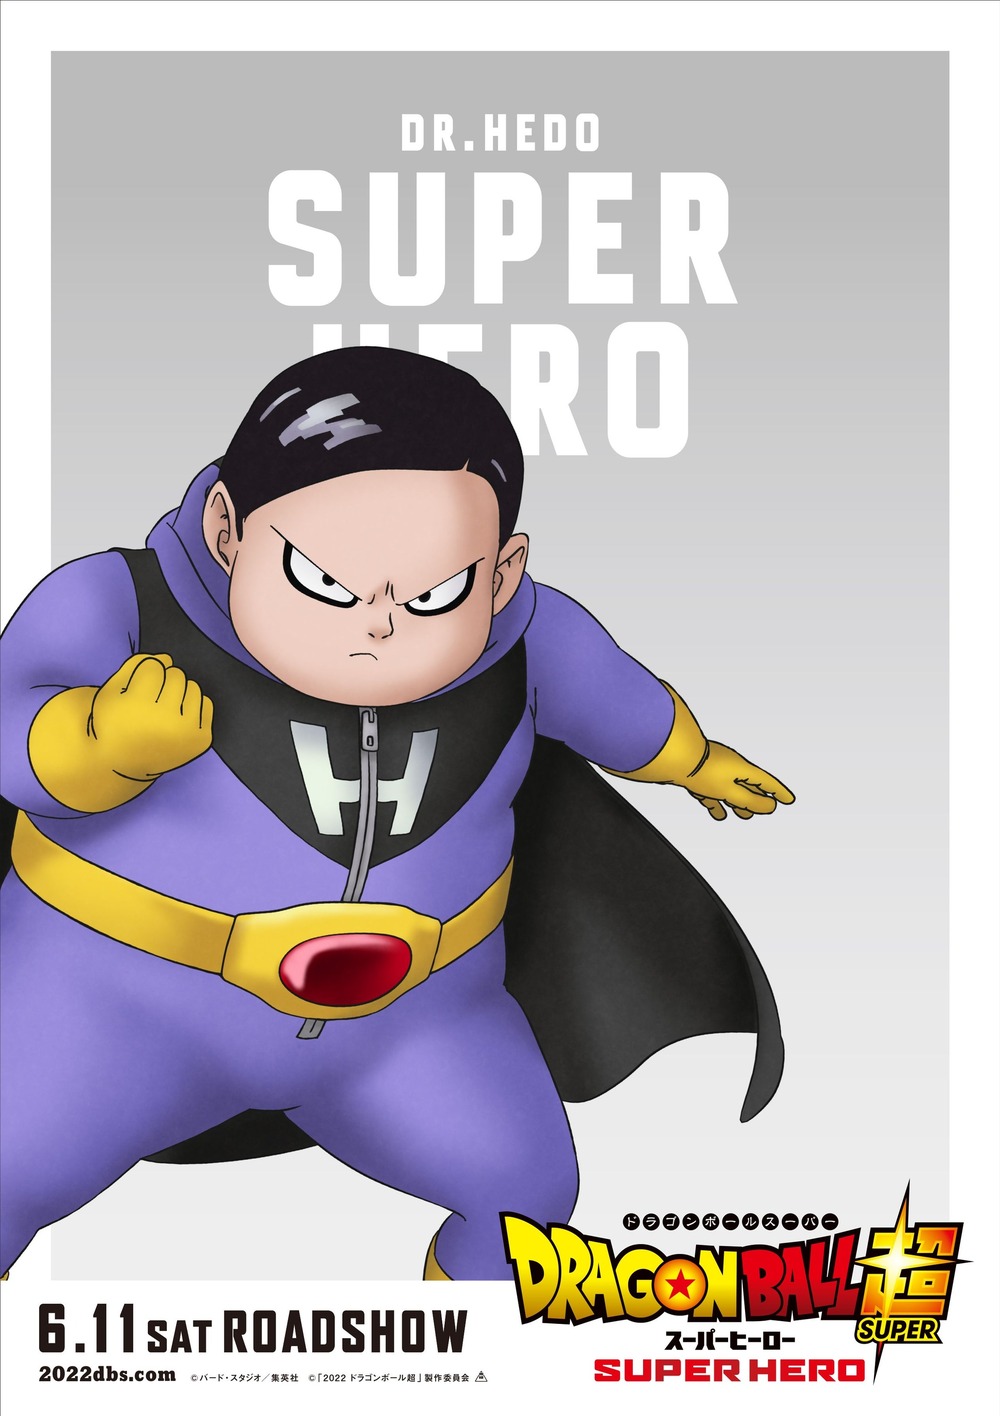 New Dragon Ball Super Super Hero First Limited Edition DVD DSTD-20690 Japan